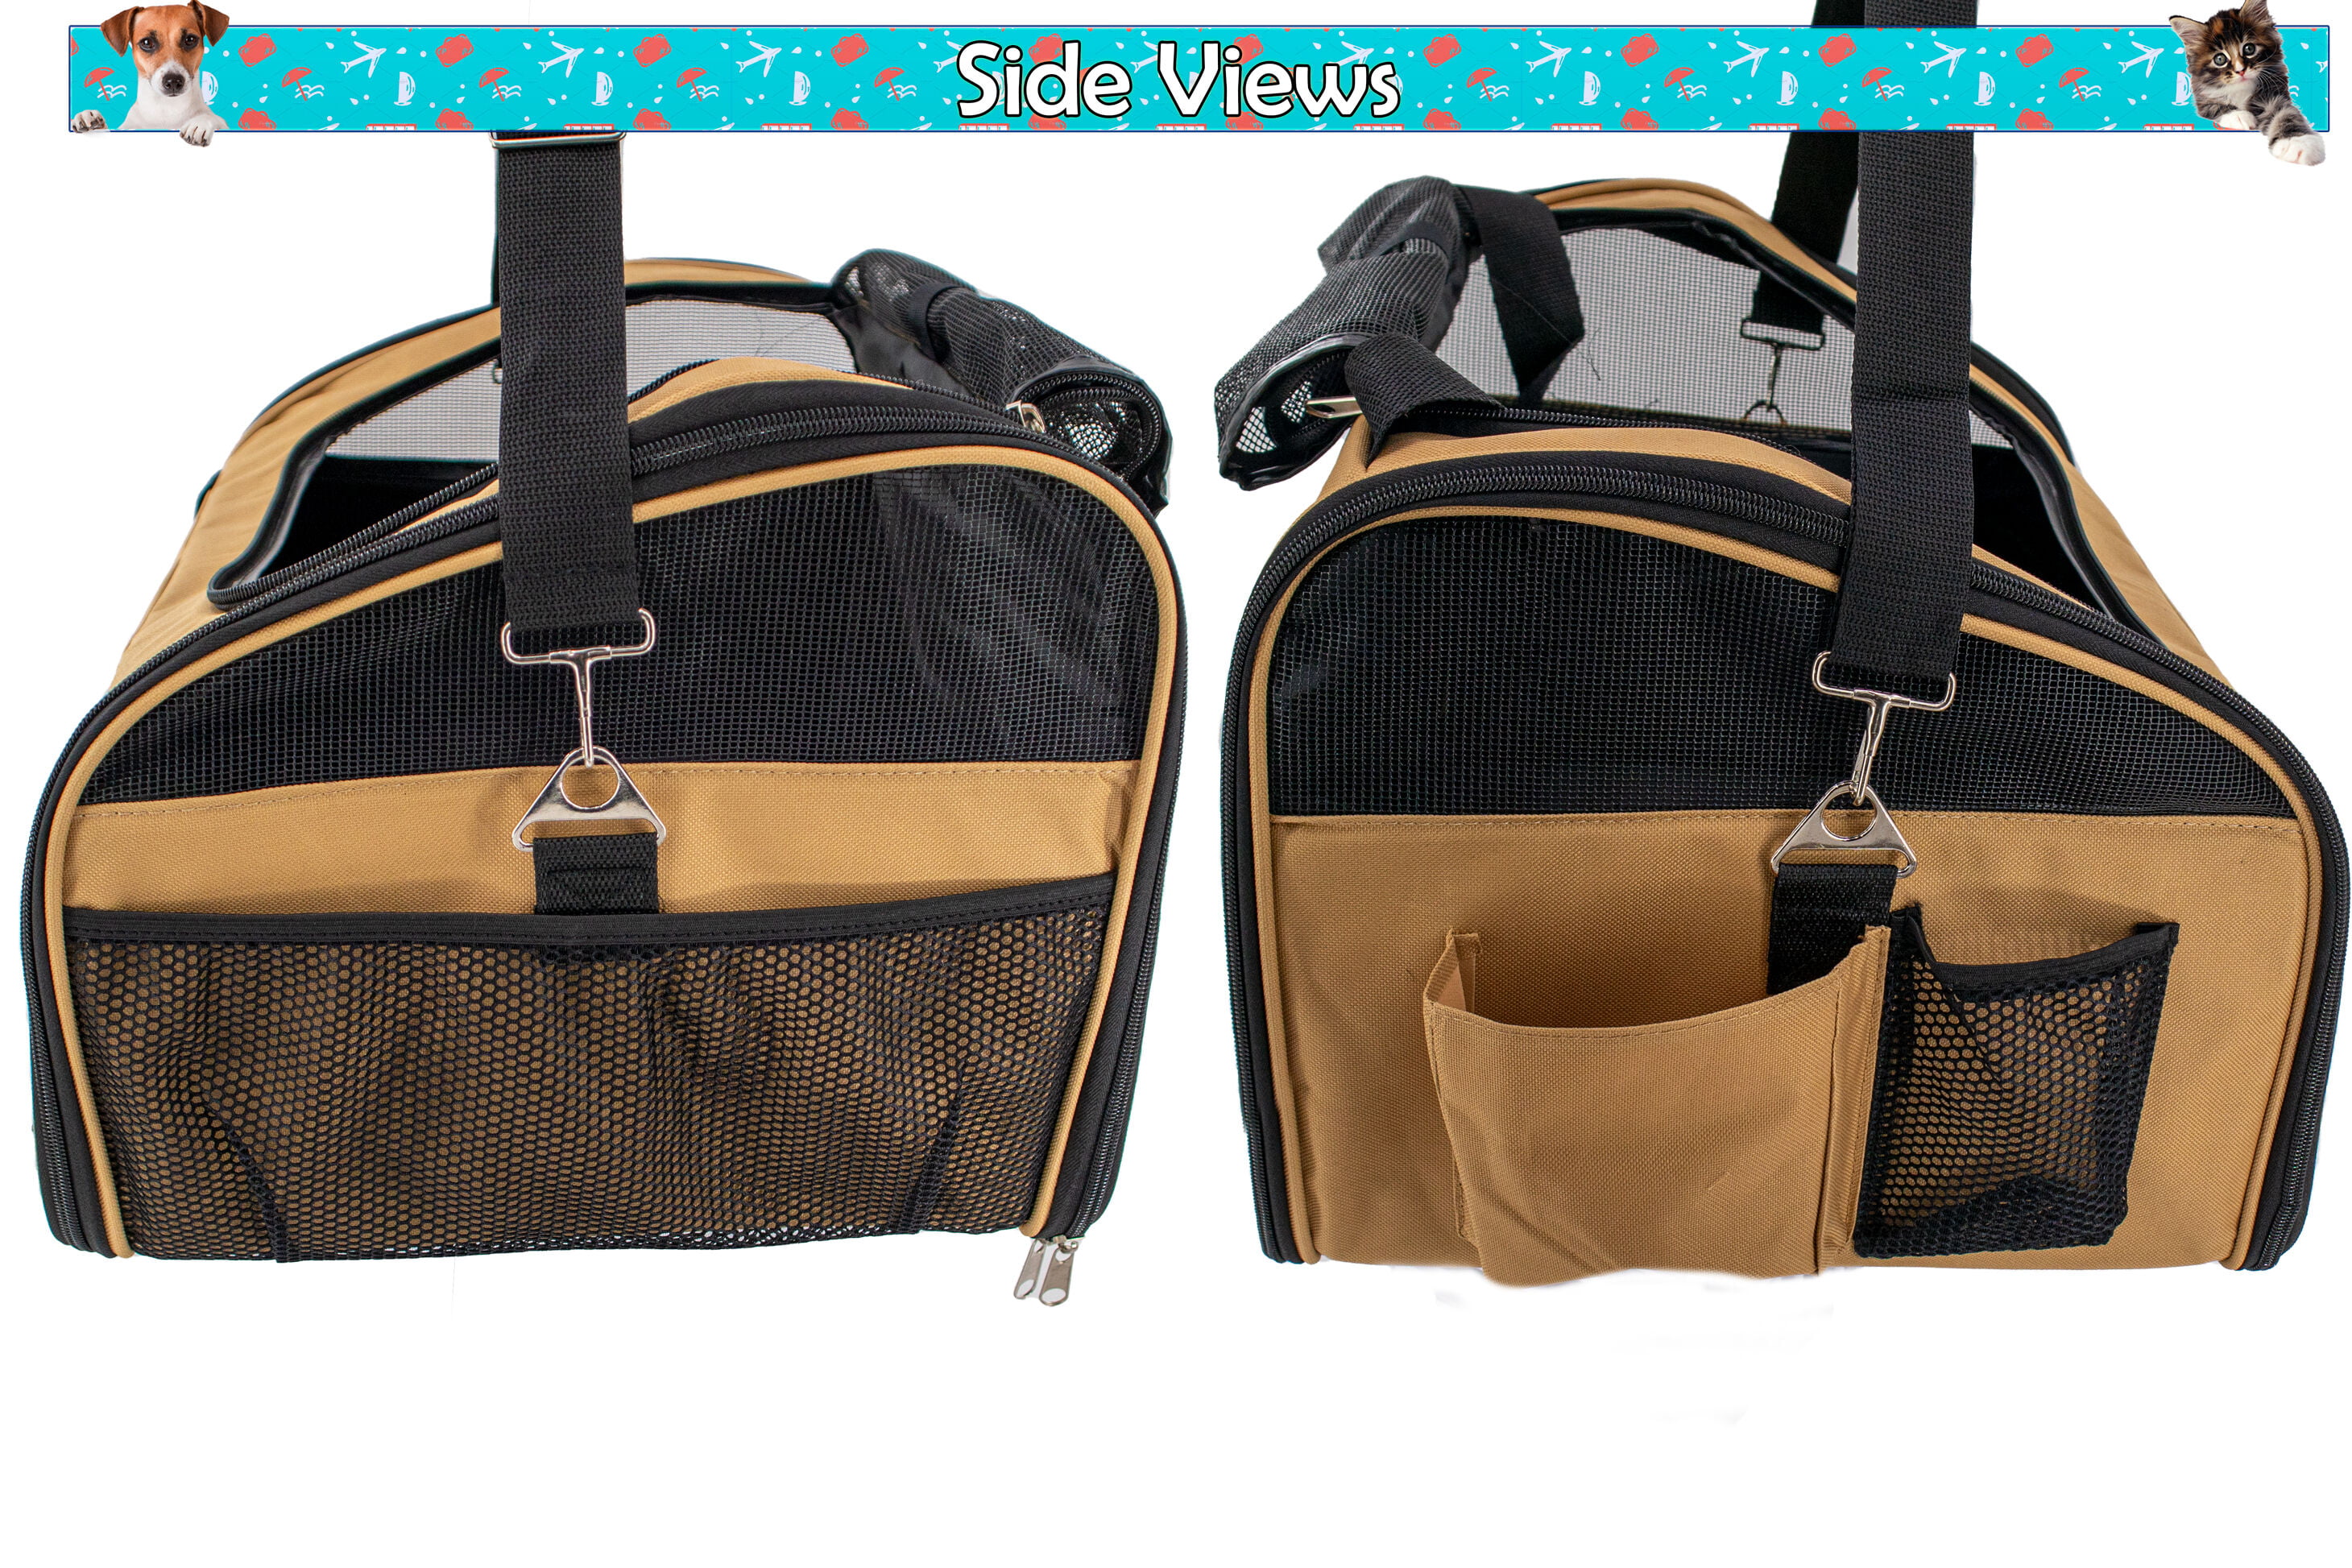 Petique AirPaws Designer Dog Carrier TSA Approved, Ideal For Small Dogs &  Cats Up To 10 Lbs. Classic Old Floral Letter Pattern, Drop Delivery HO  OTY5O. From Homeindustry, $145.63